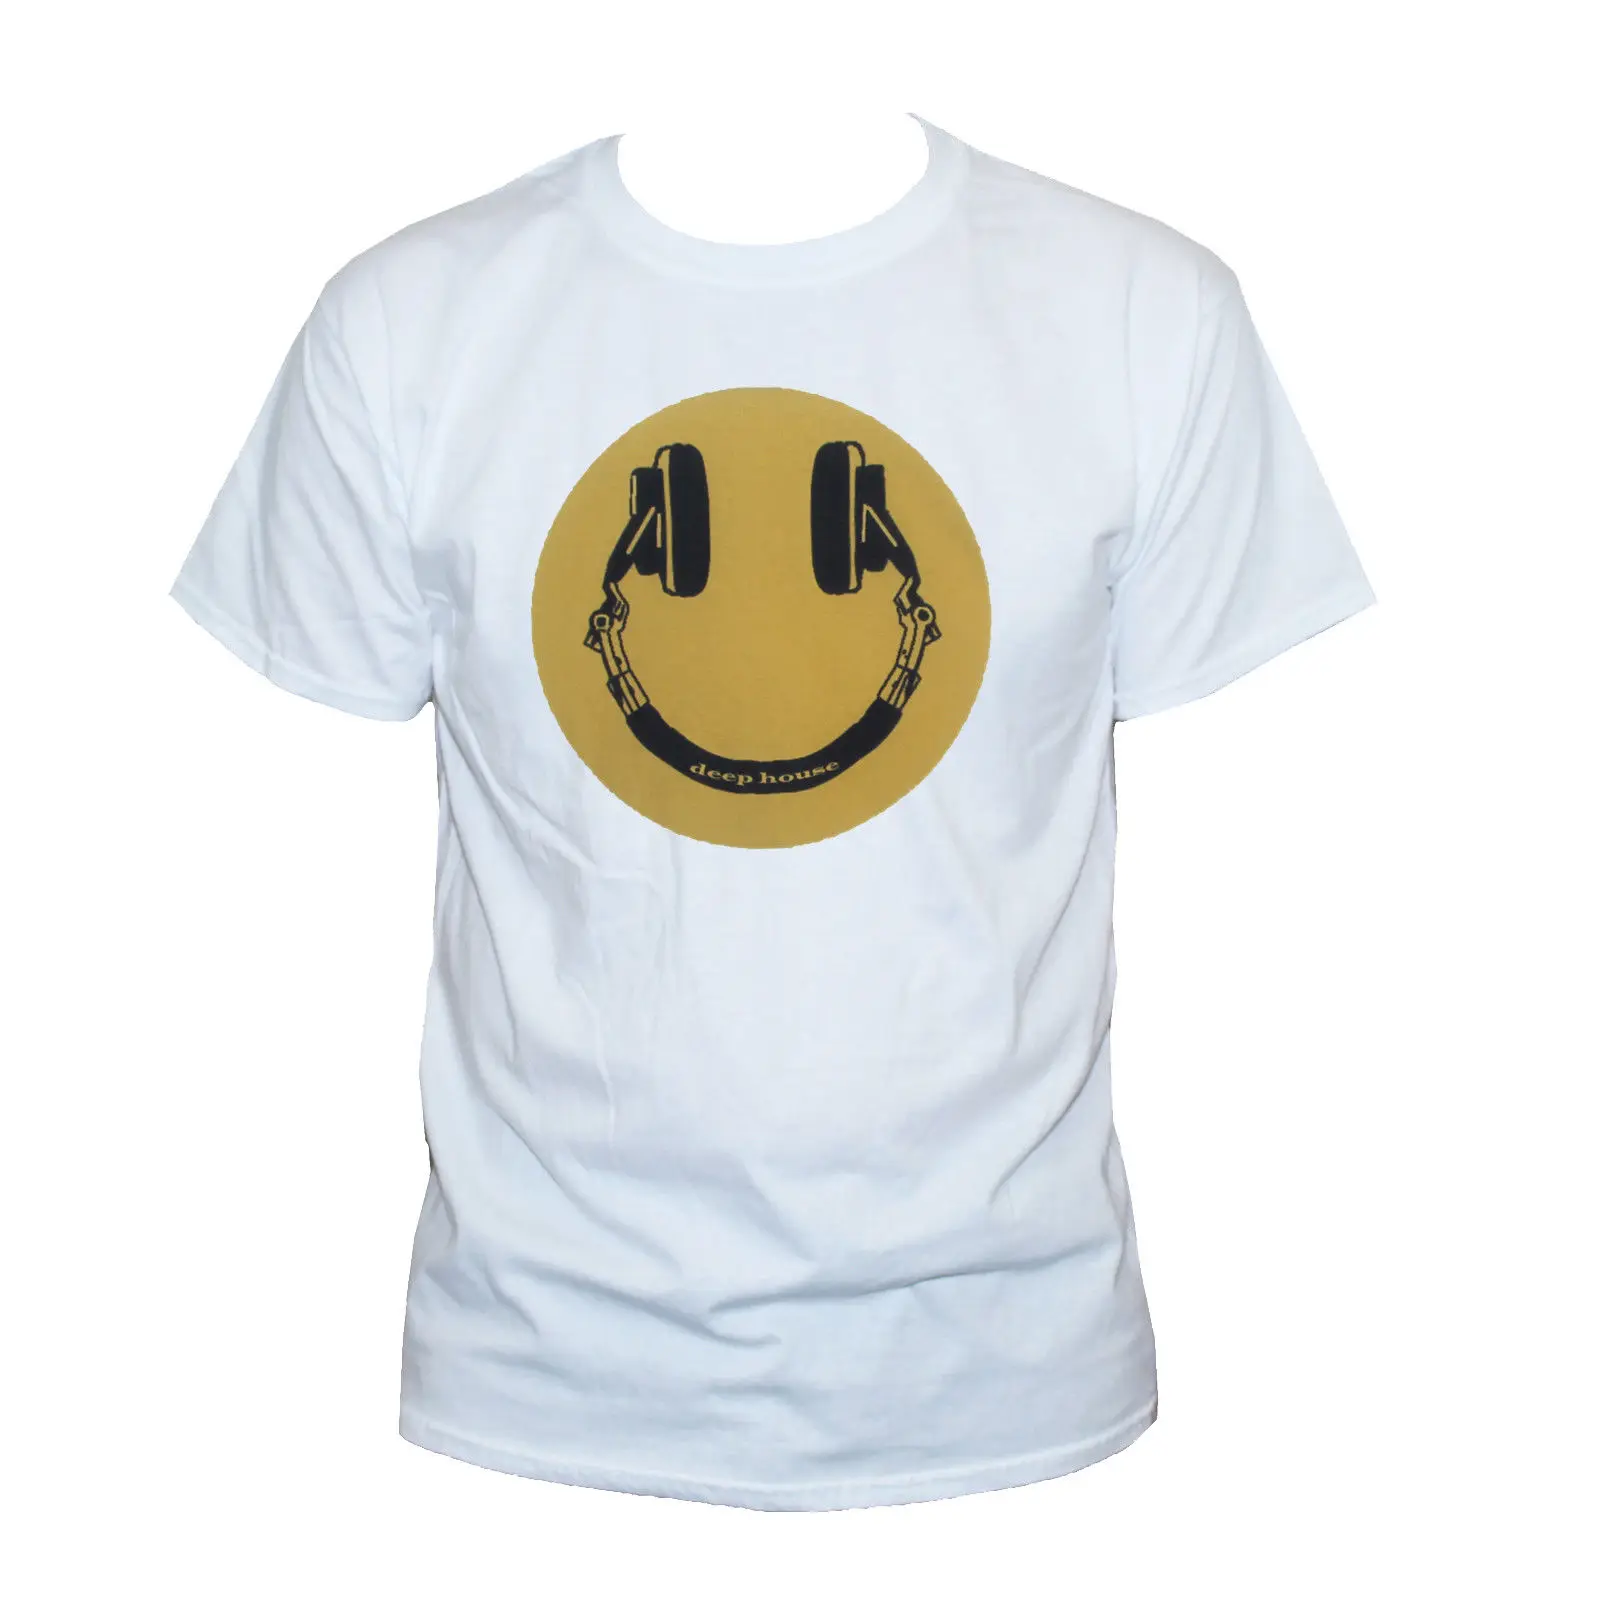 Deep House Music T SHIRT Techno Smiley Face Retro Graphic Printed Cool ...